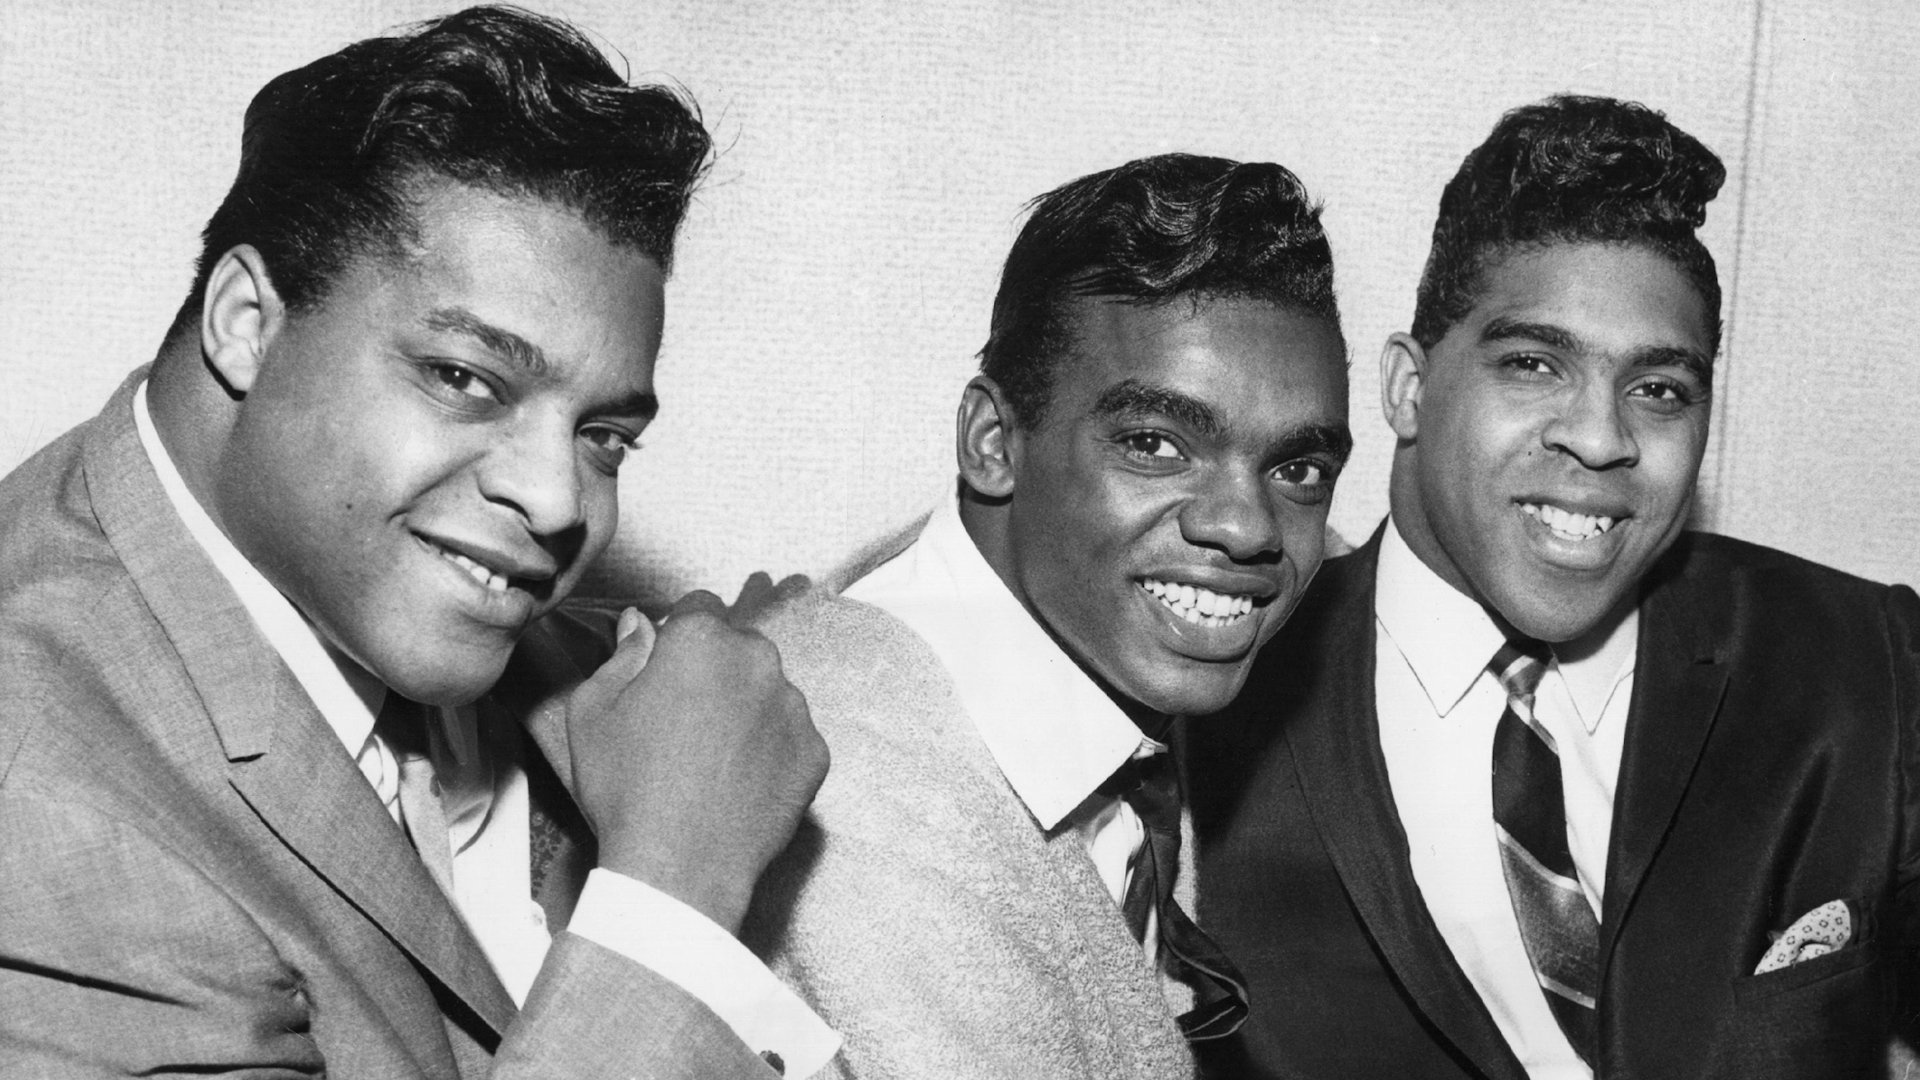 What Would You Do? av The Isley Brothers